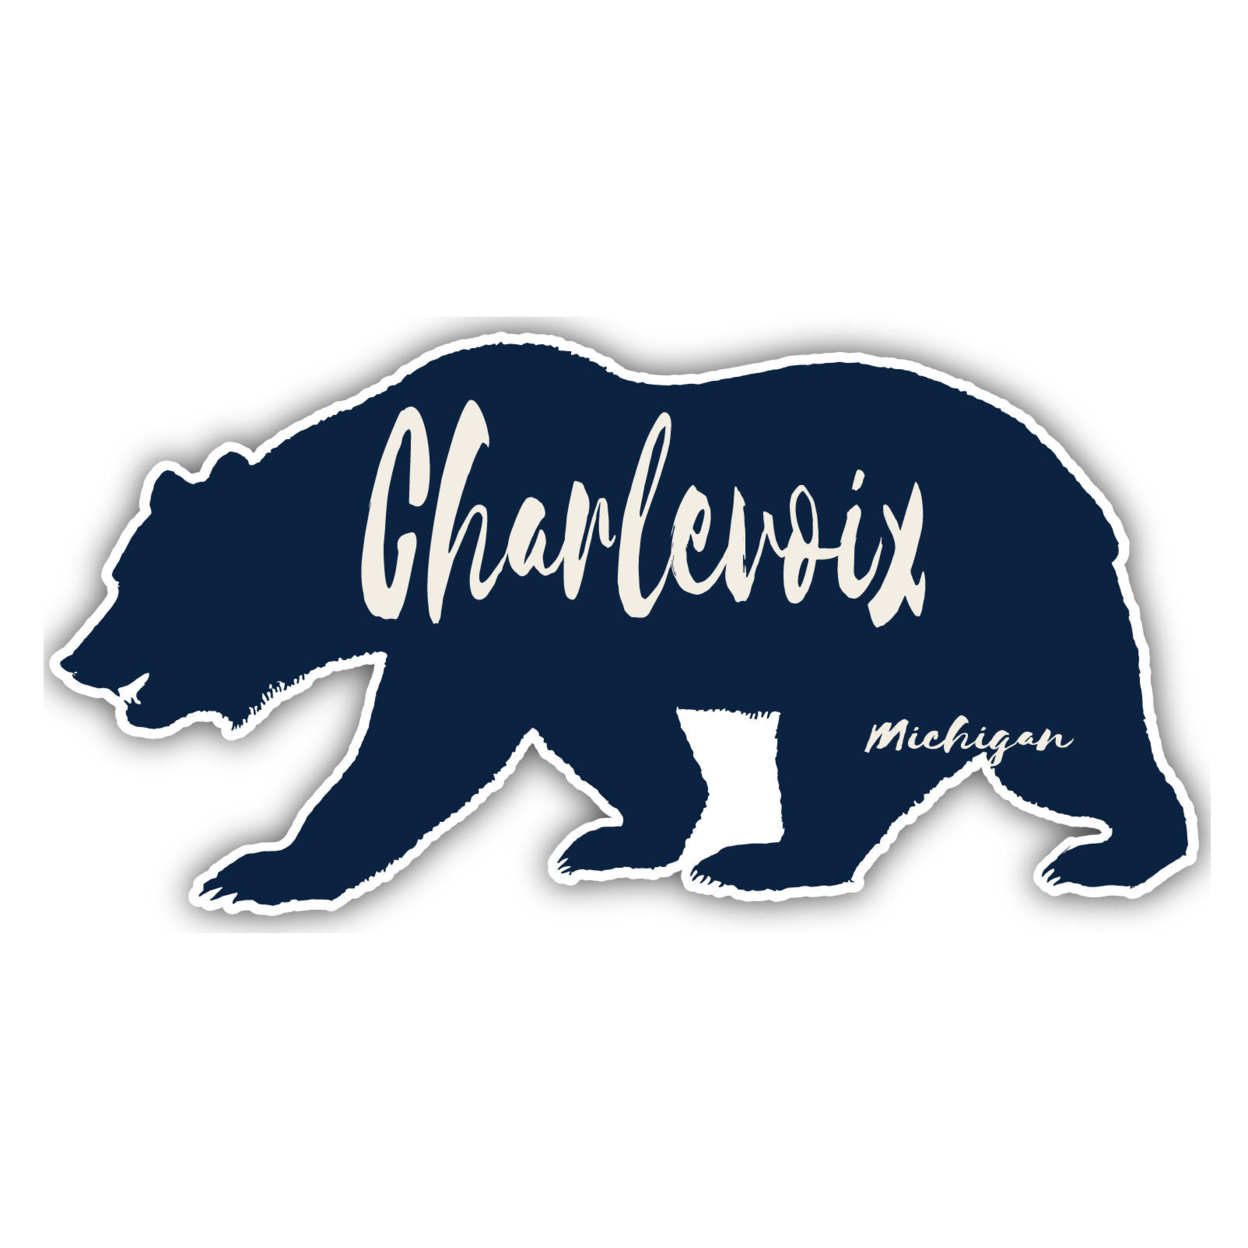 Charlevoix Michigan Souvenir Decorative Stickers (Choose Theme And Size) - 4-Pack, 12-Inch, Bear